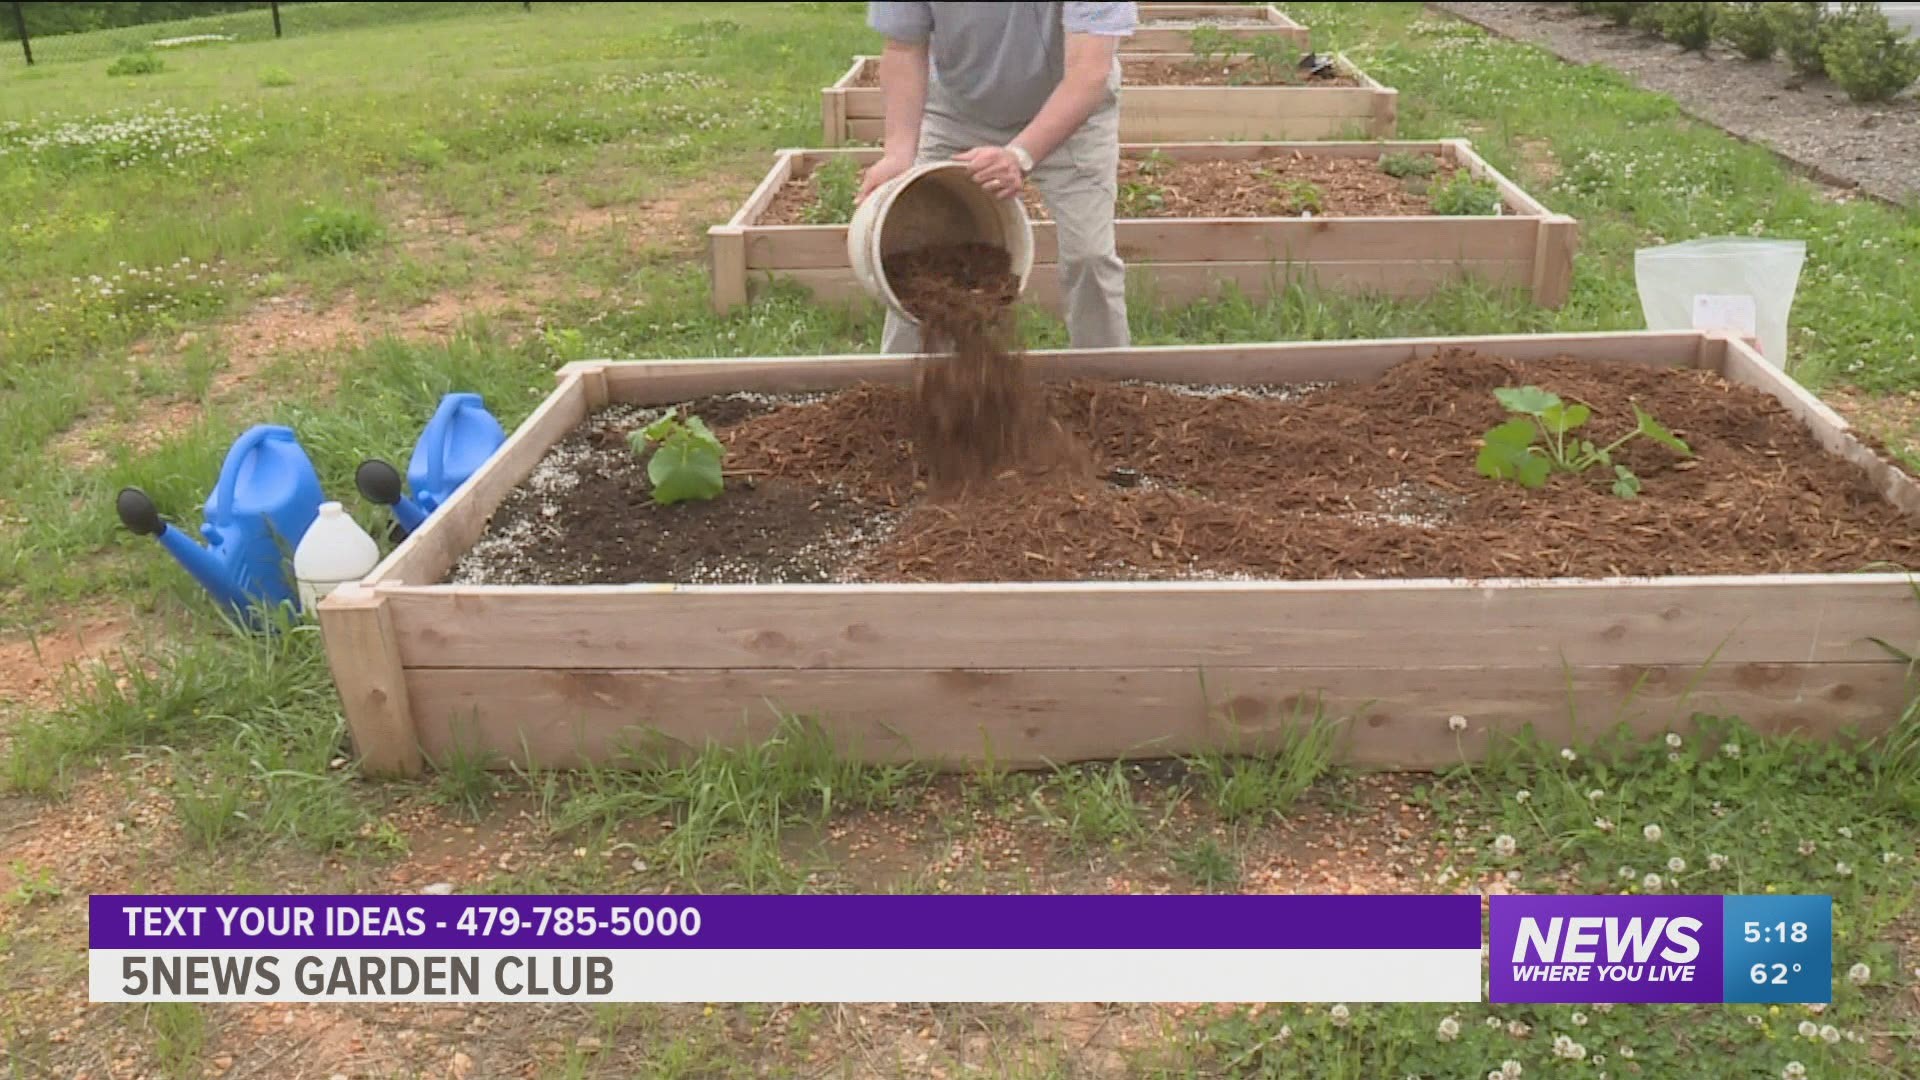 Join 5NEWS and Garden IQ for tips to get your garden ready for a new growing season.